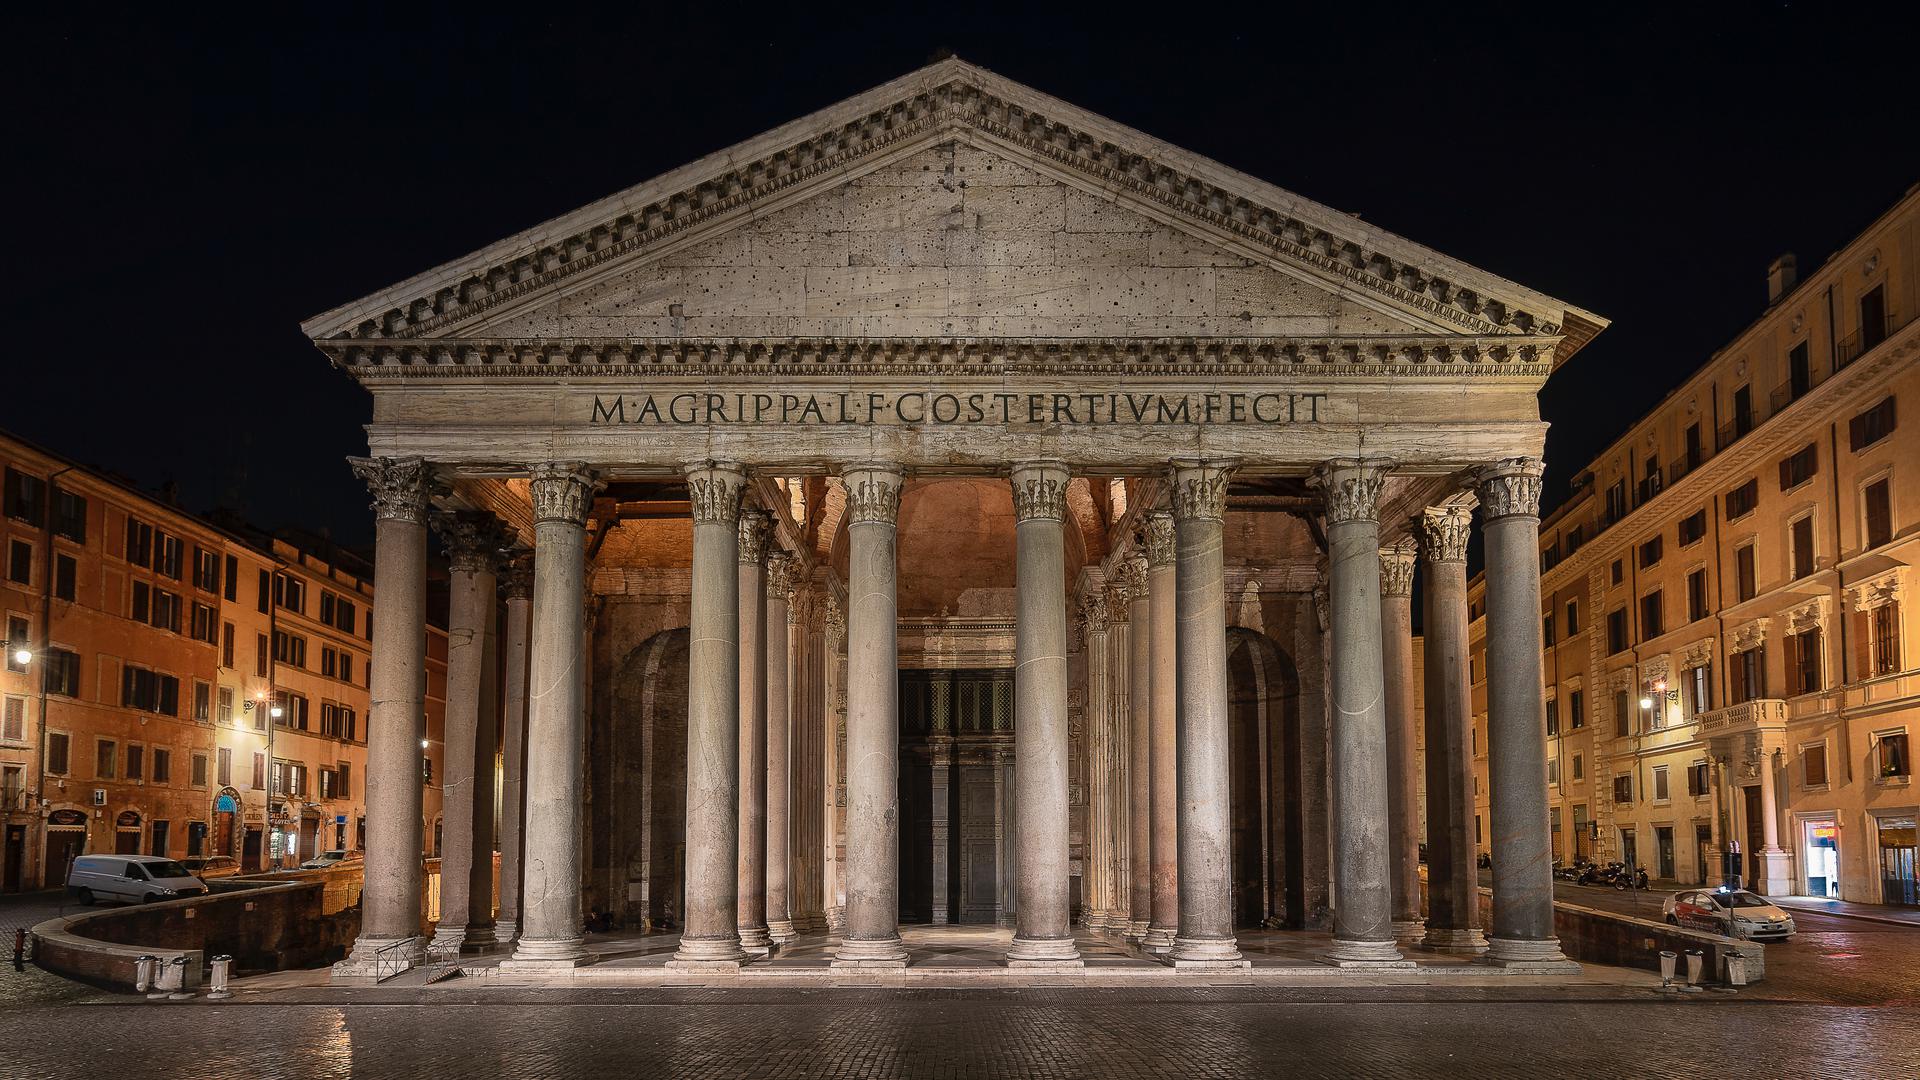 Portico Entrance to the Pantheon in Rome, Italy.